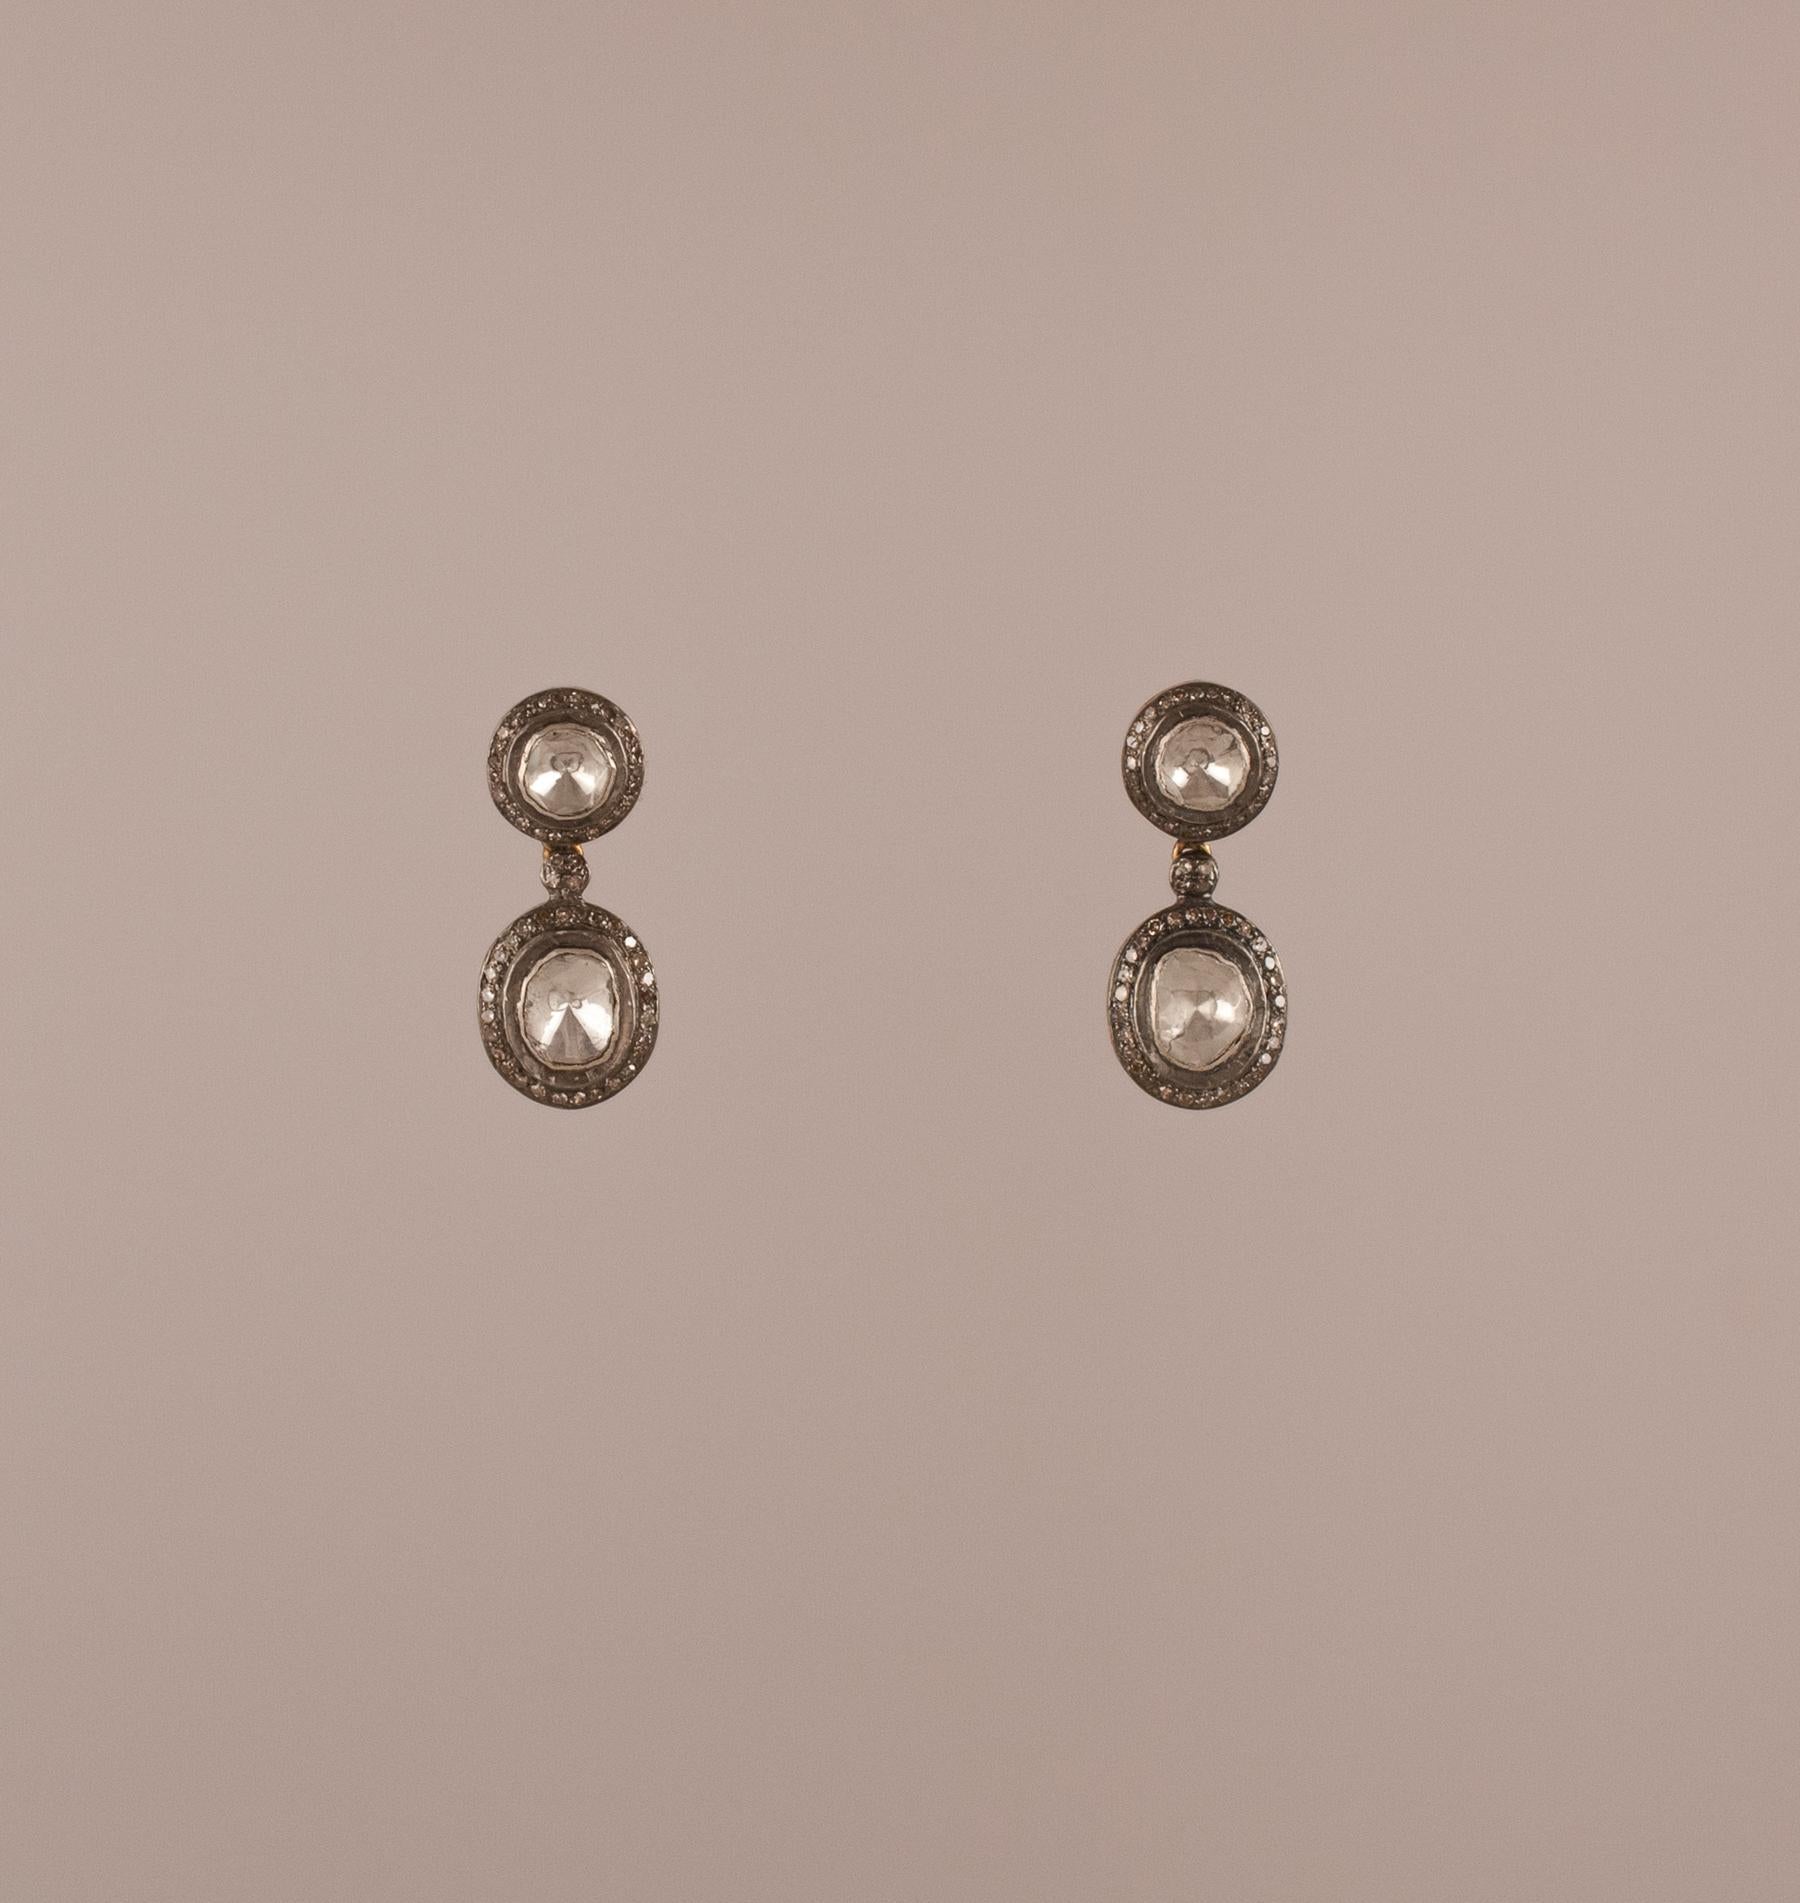 These two-tiered rose cut diamond earrings feature a circular stone on top and an asymmetrical dangling stone beneath, both in a traditional Indian foil-backed setting and encircled by diamonds set in sterling silver. The back of the earrings are an